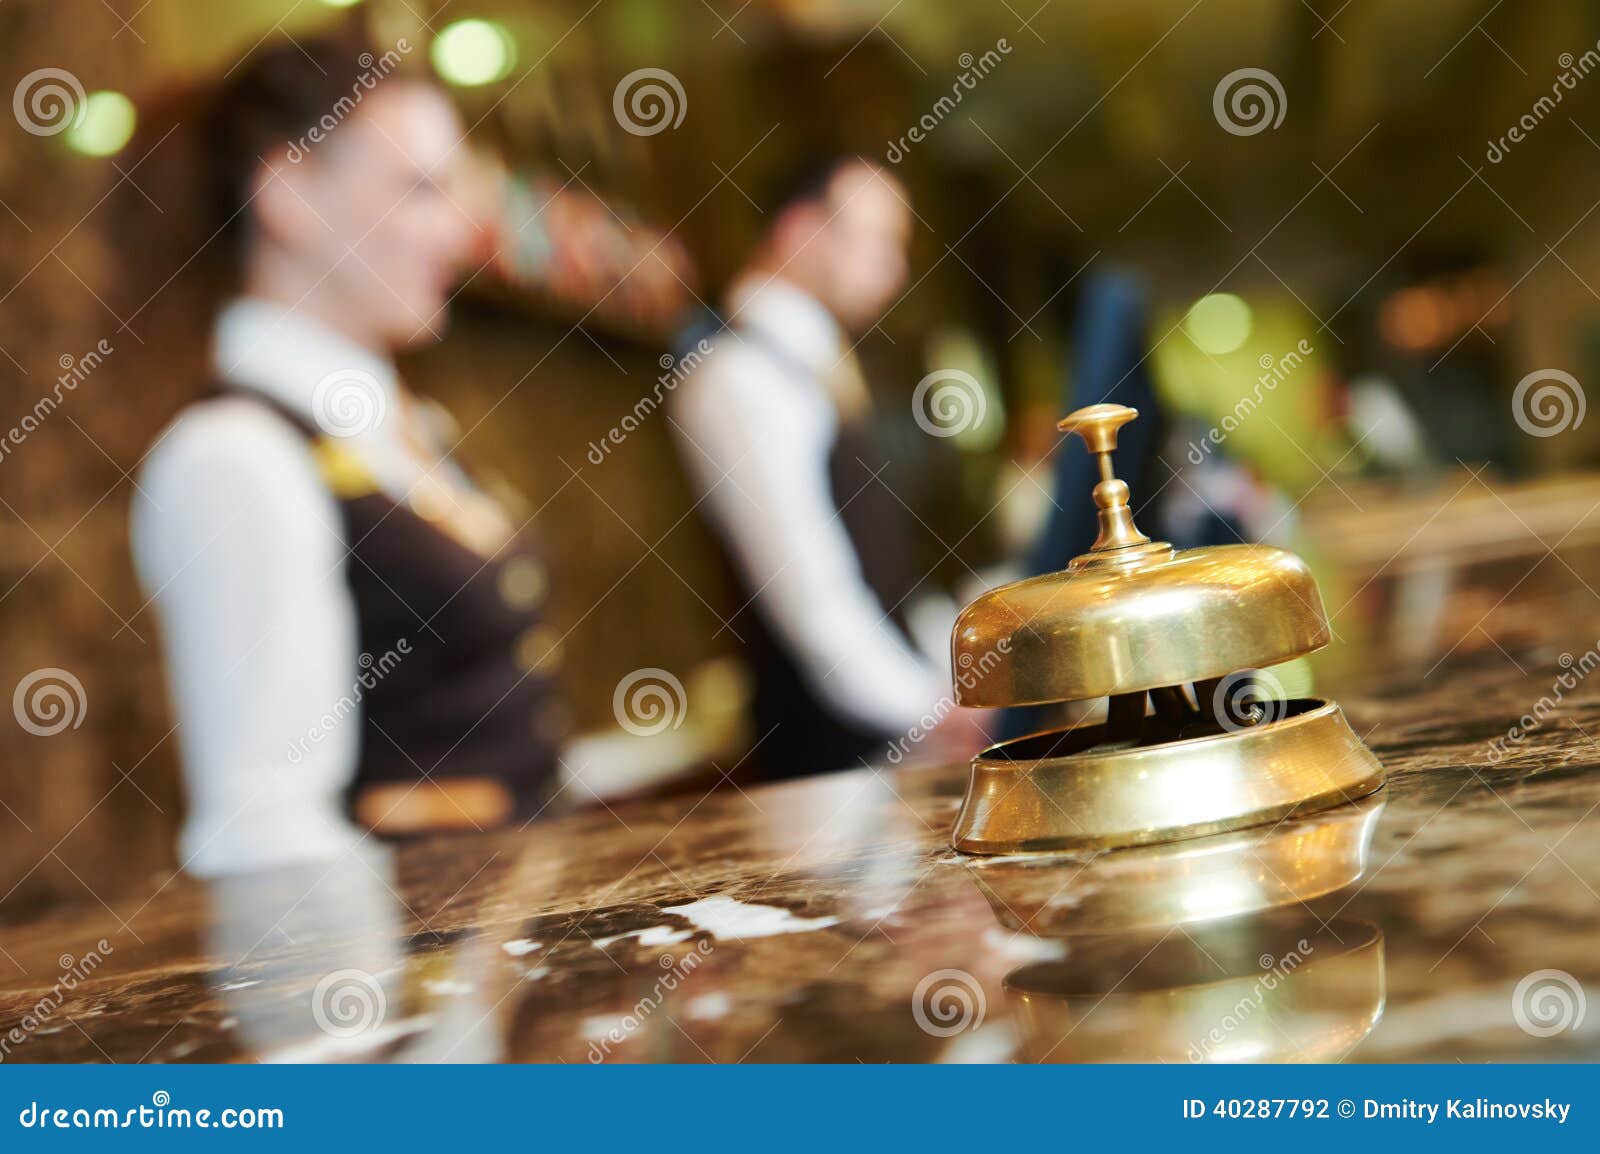 hotel reception with bell